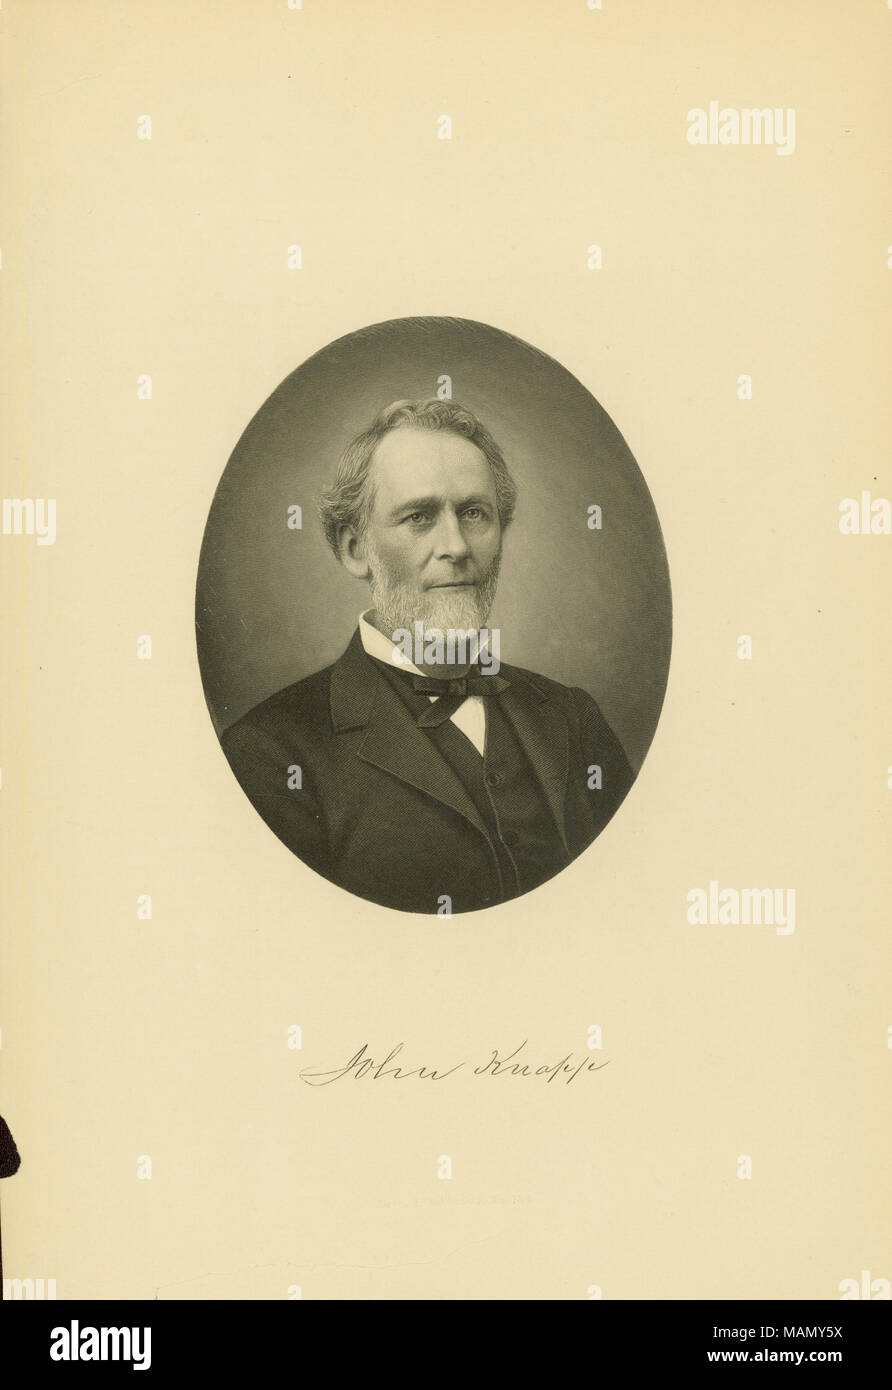 Title: John Knapp.  John Knapp. Steel engraving by unknown,  1883 Missouri History Museum Photograph and Print Collection. Portraits  n12686 Stock Photo